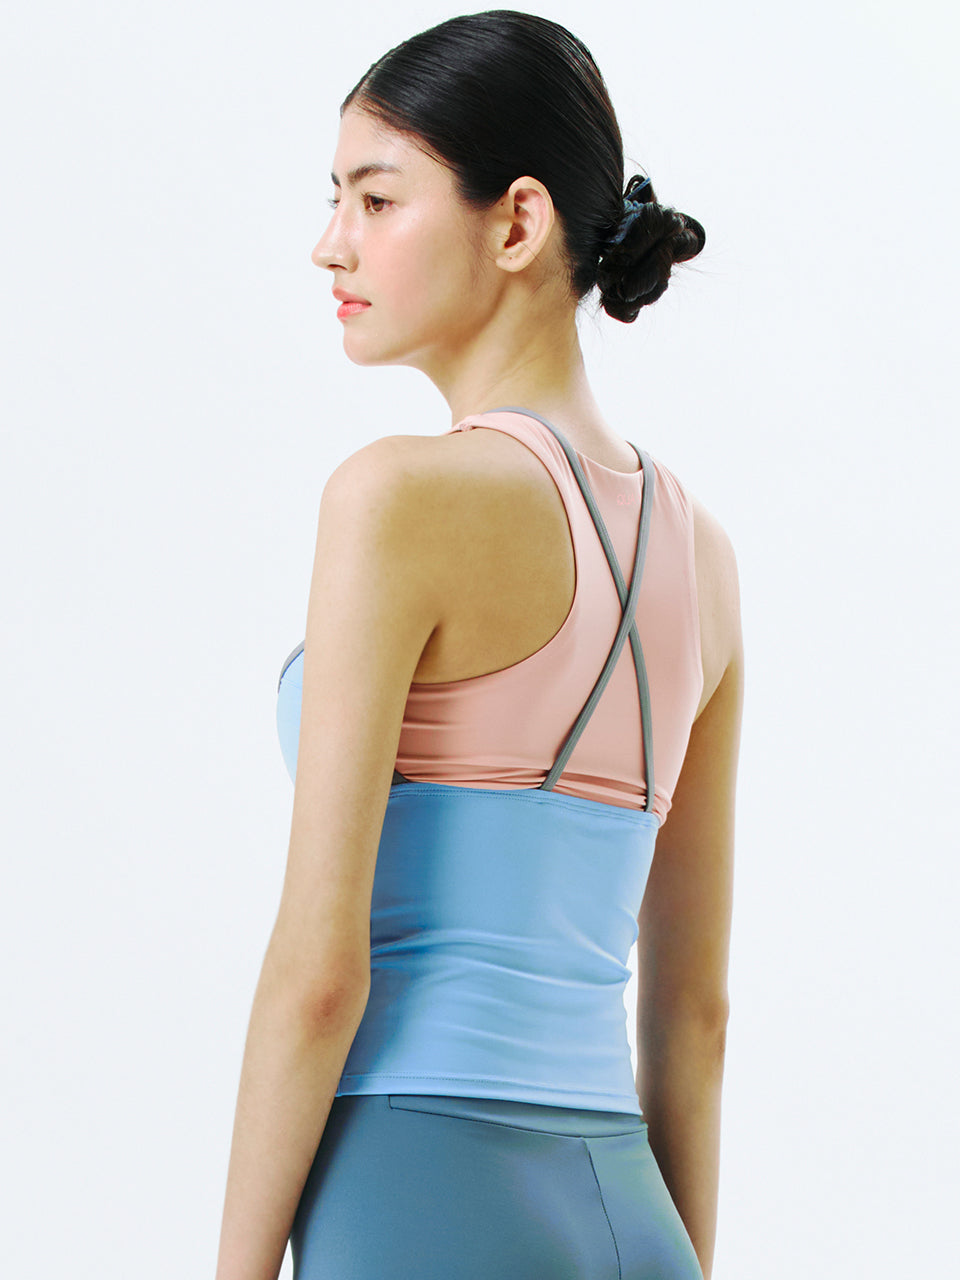 Game Start Athleisure Sleeveless Top Blue Coral